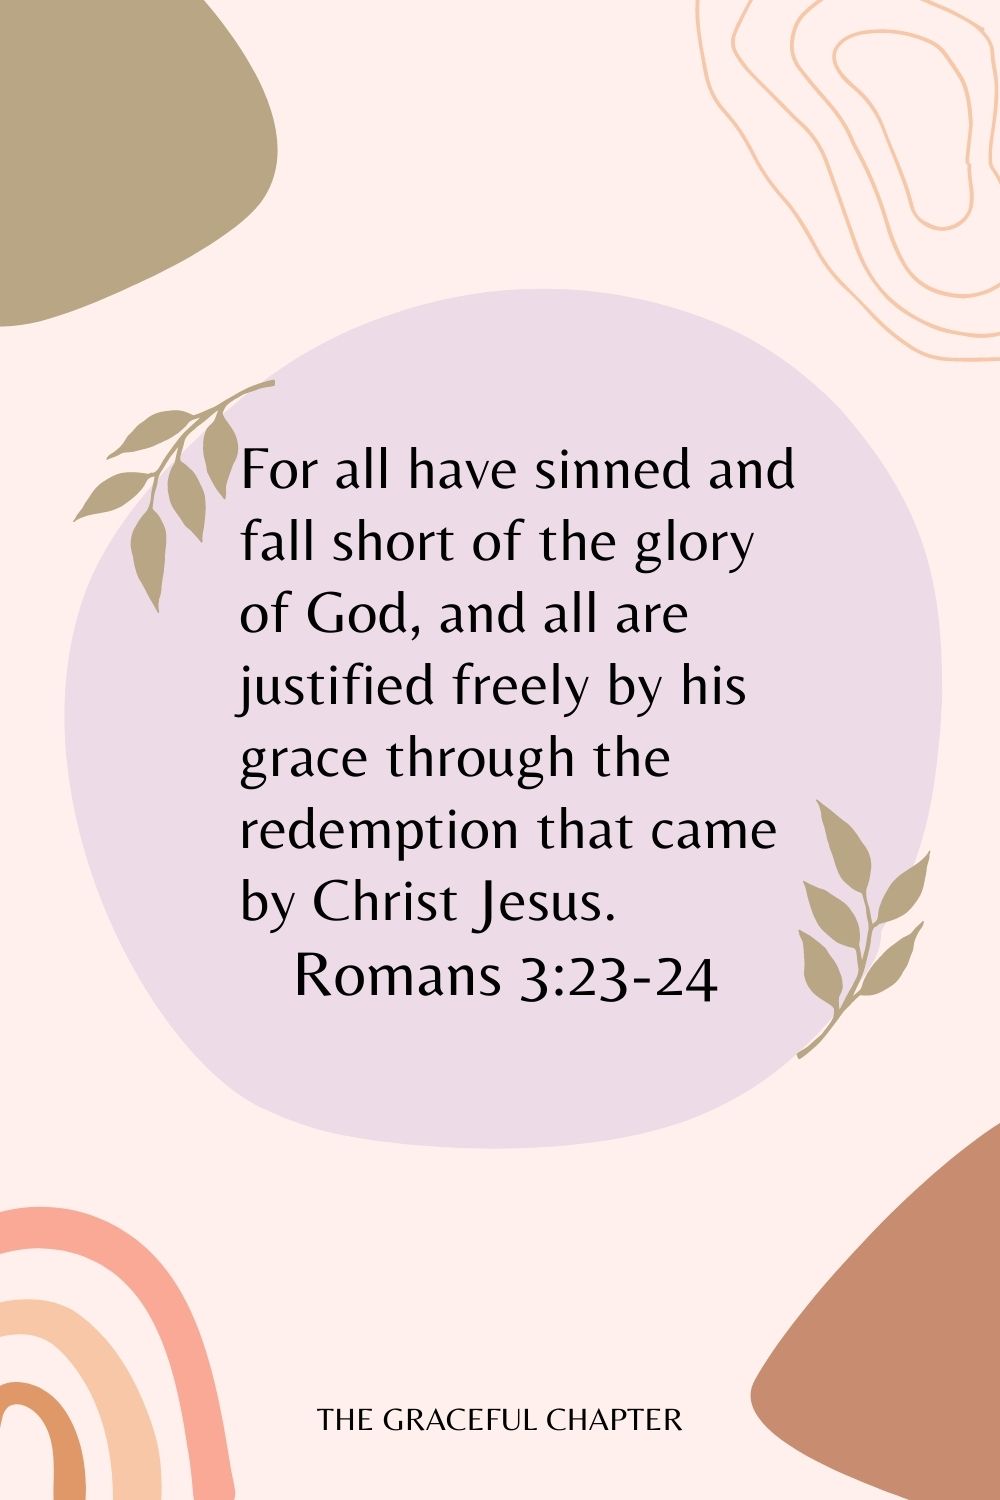 For all have sinned and fall short of the glory of God, and all are justified freely by his grace through the redemption that came by Christ Jesus. Romans 3:23-24